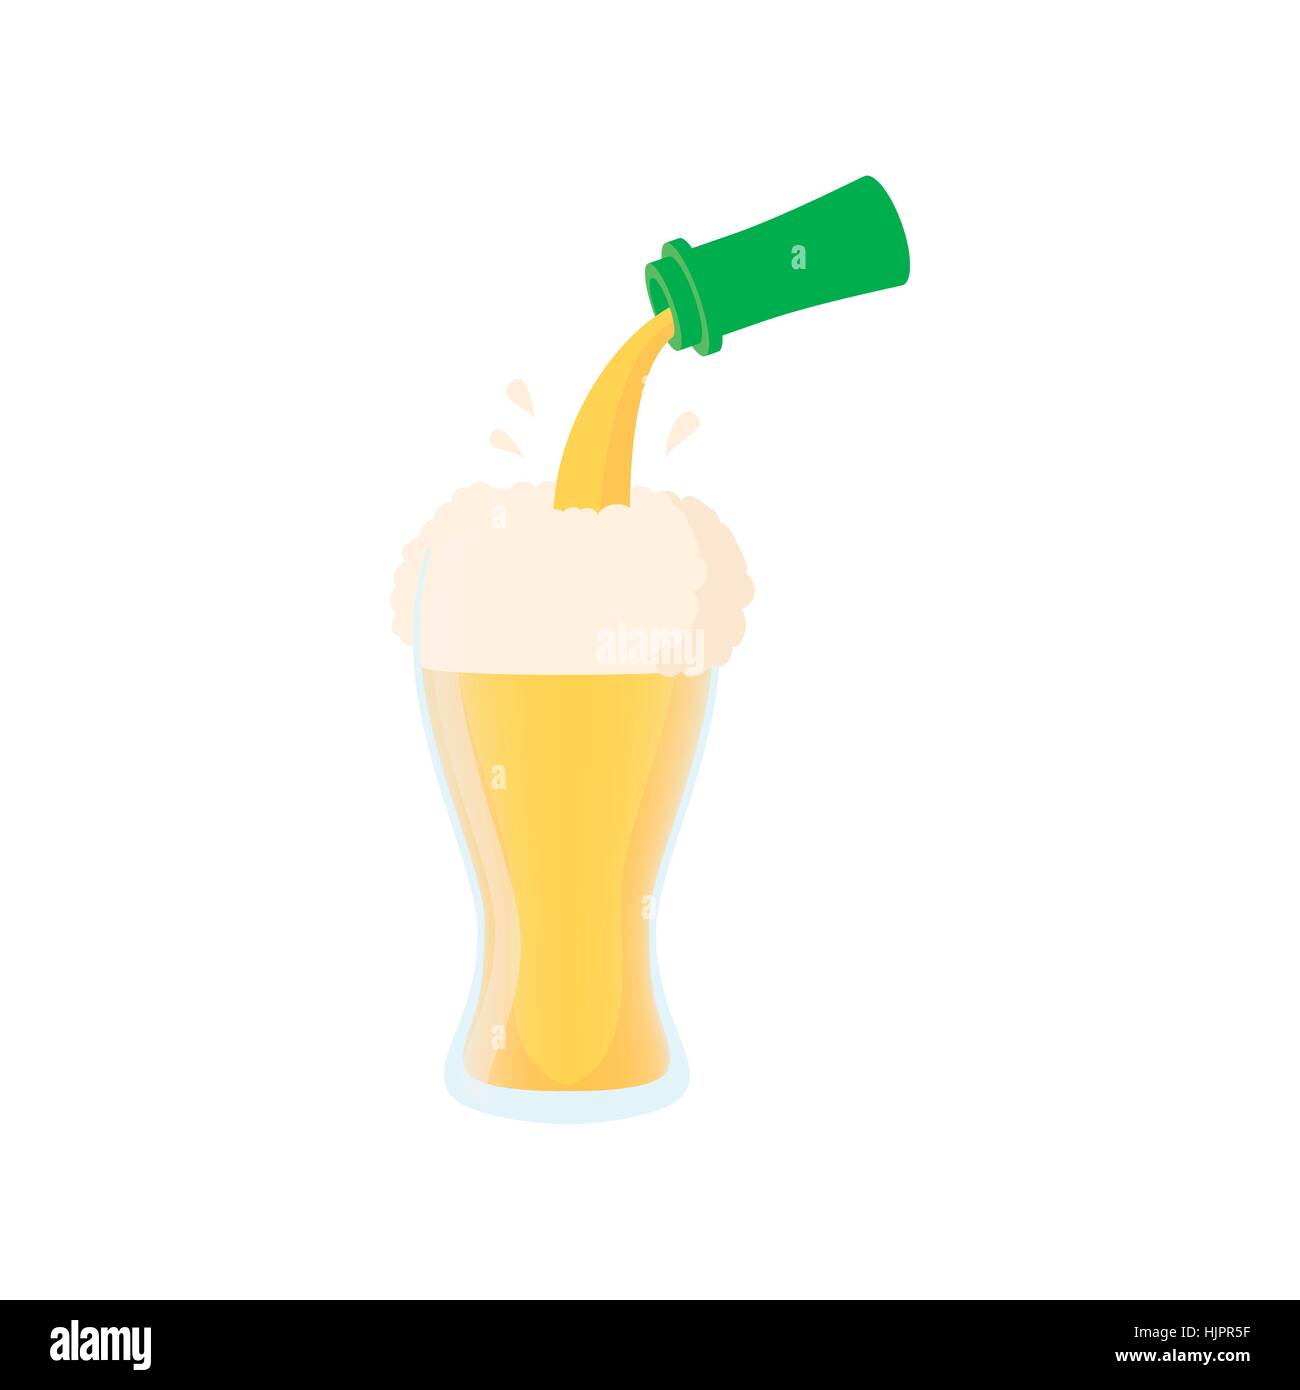 Beer pouring from bottle into glass icon in cartoon style on a white background Stock Vector